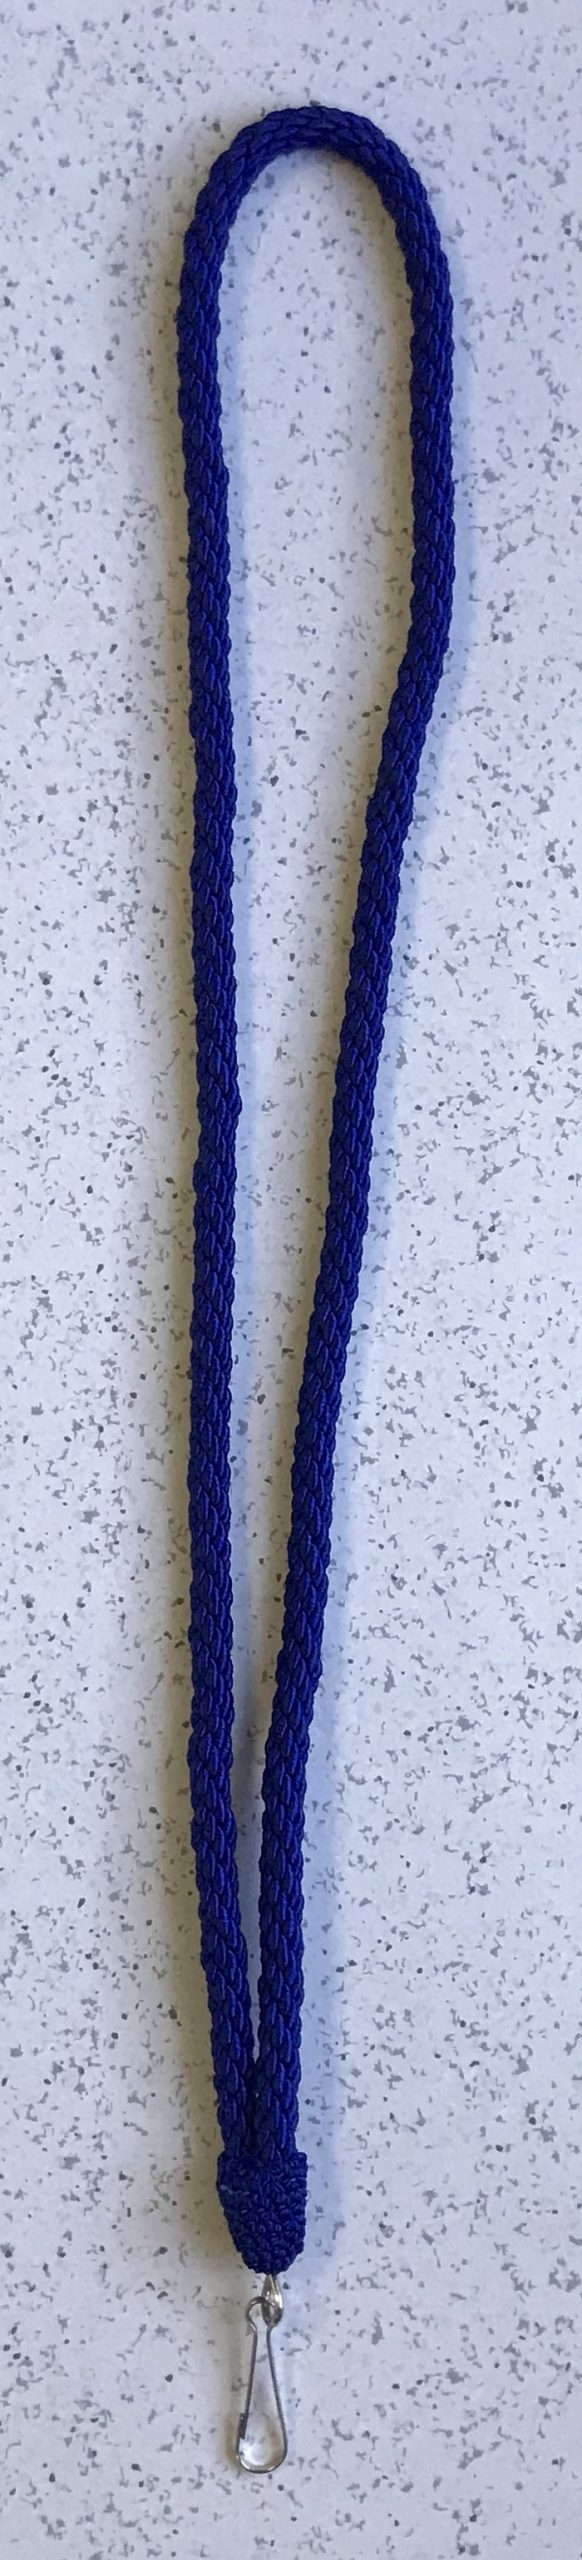 Rope Jewel Collar Blue New For Sale